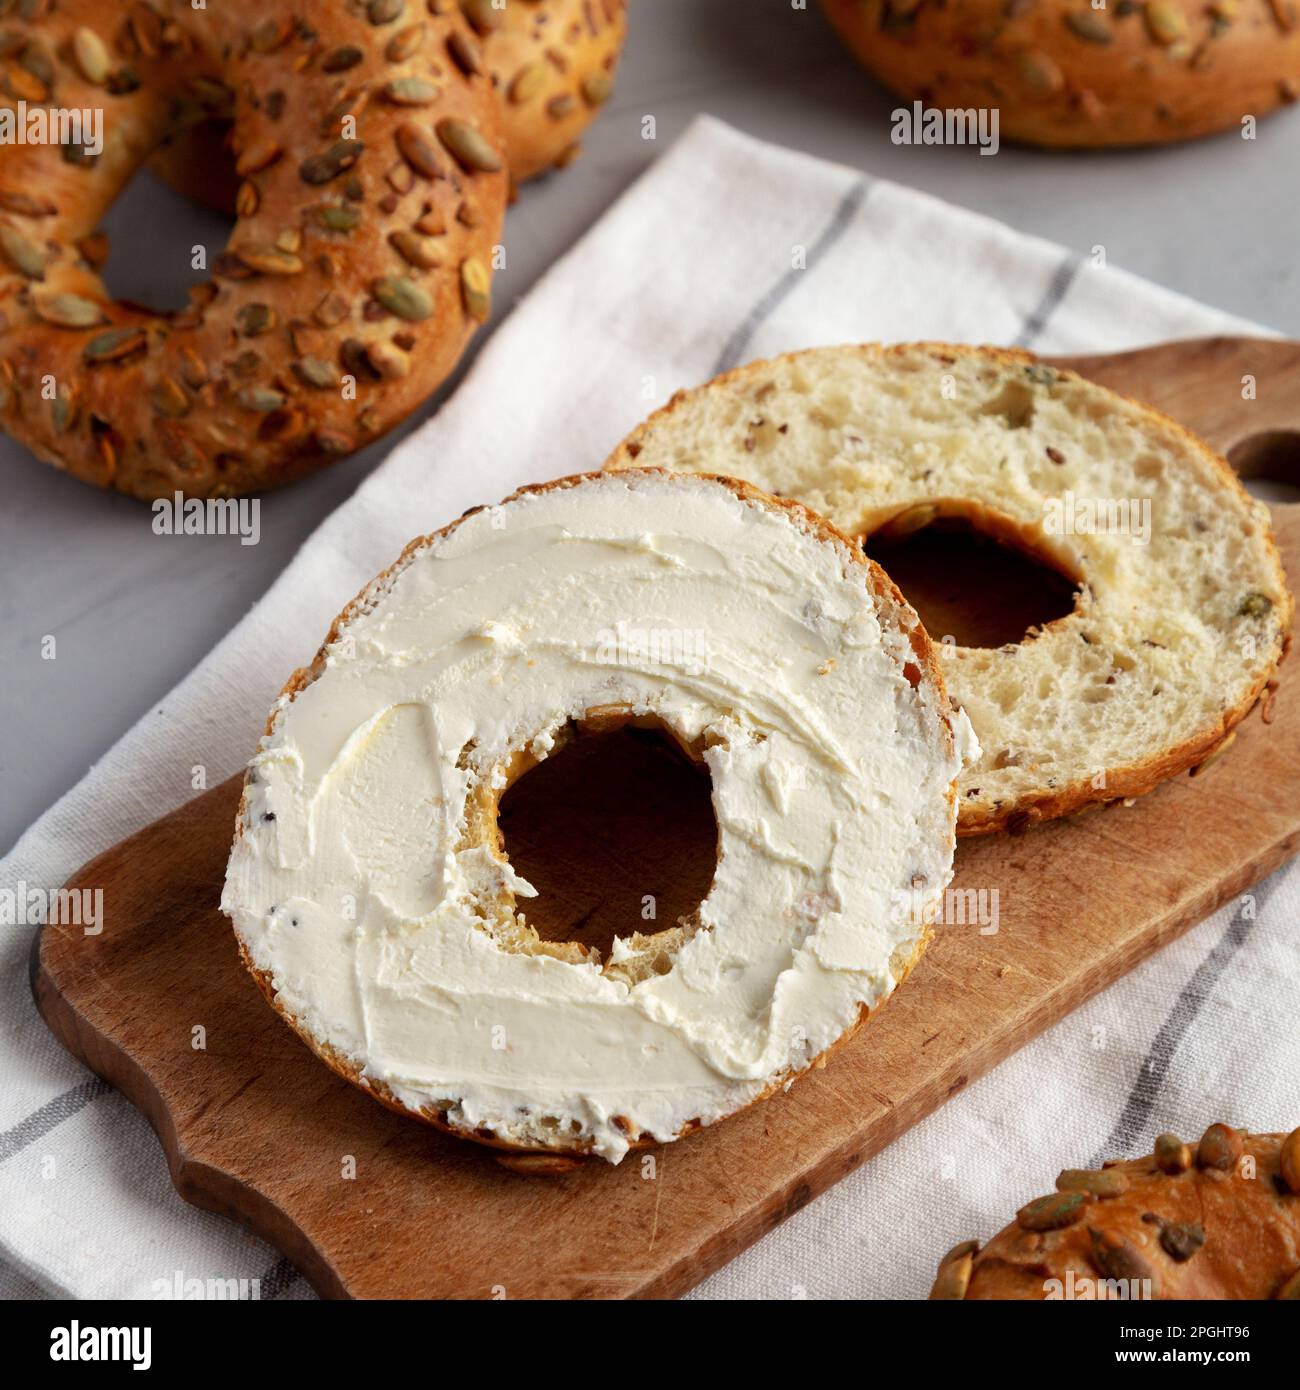 Homemade Whole Grain Bagel with Cream Cheese on a rustic wooden board, side view. Stock Photo